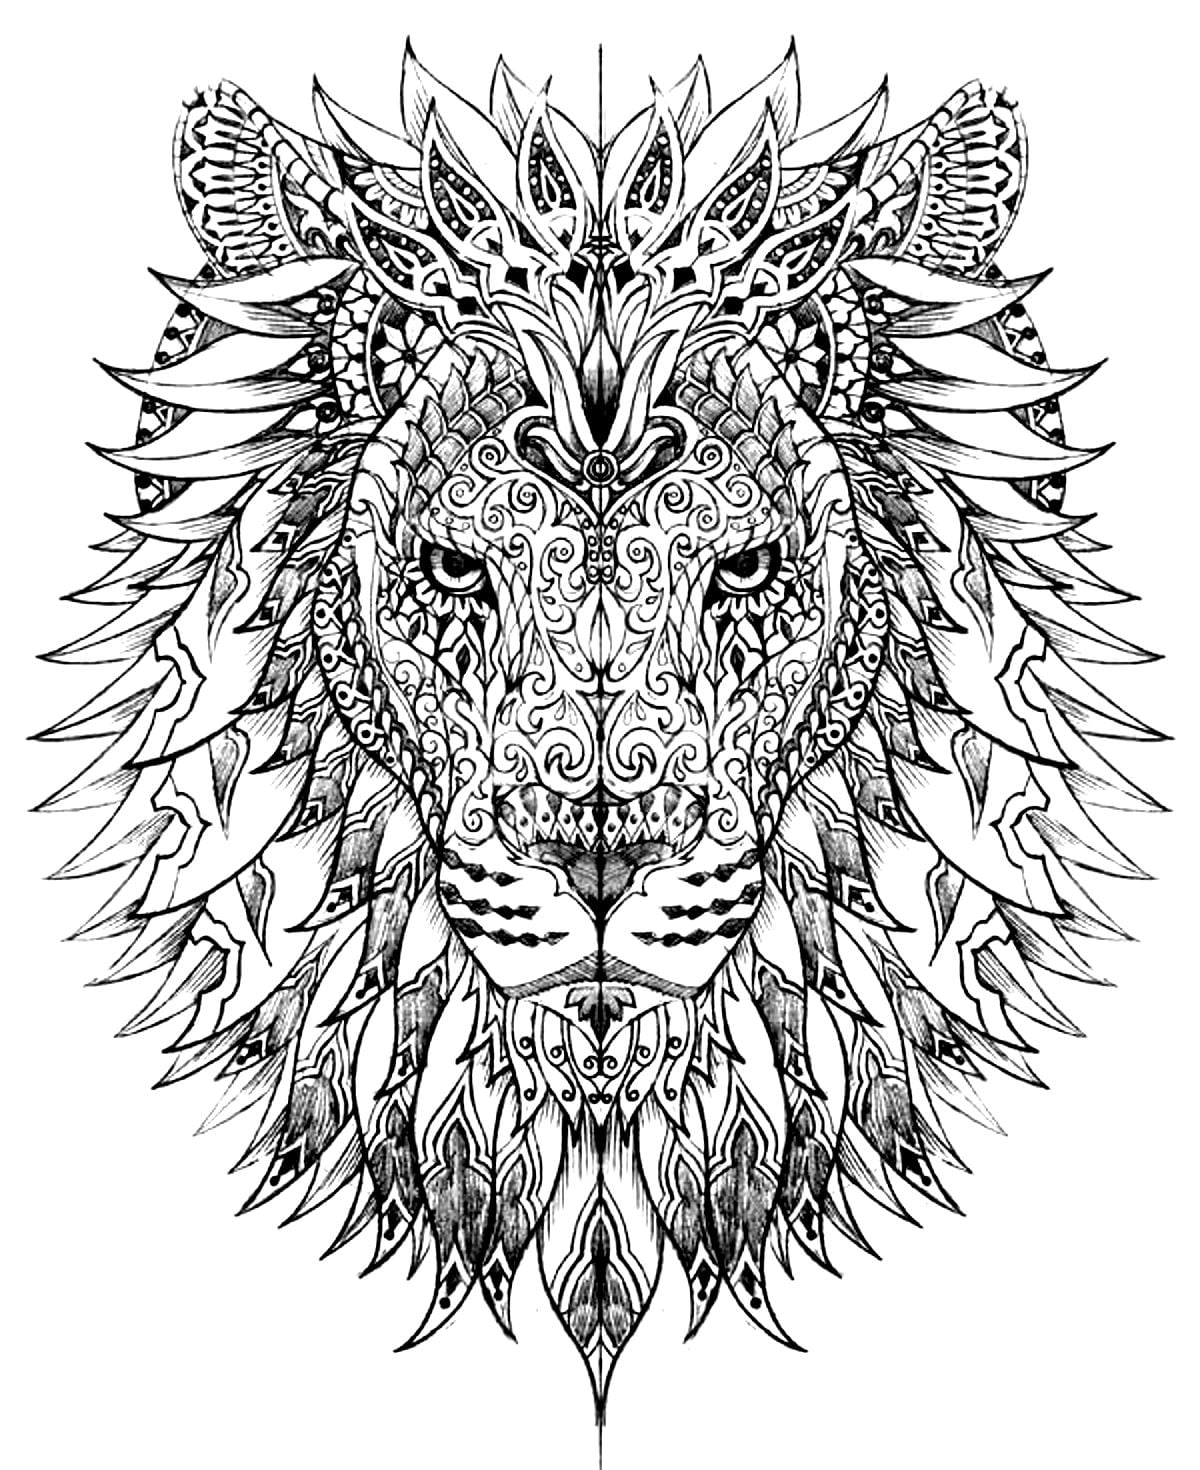 extra long coloring pages